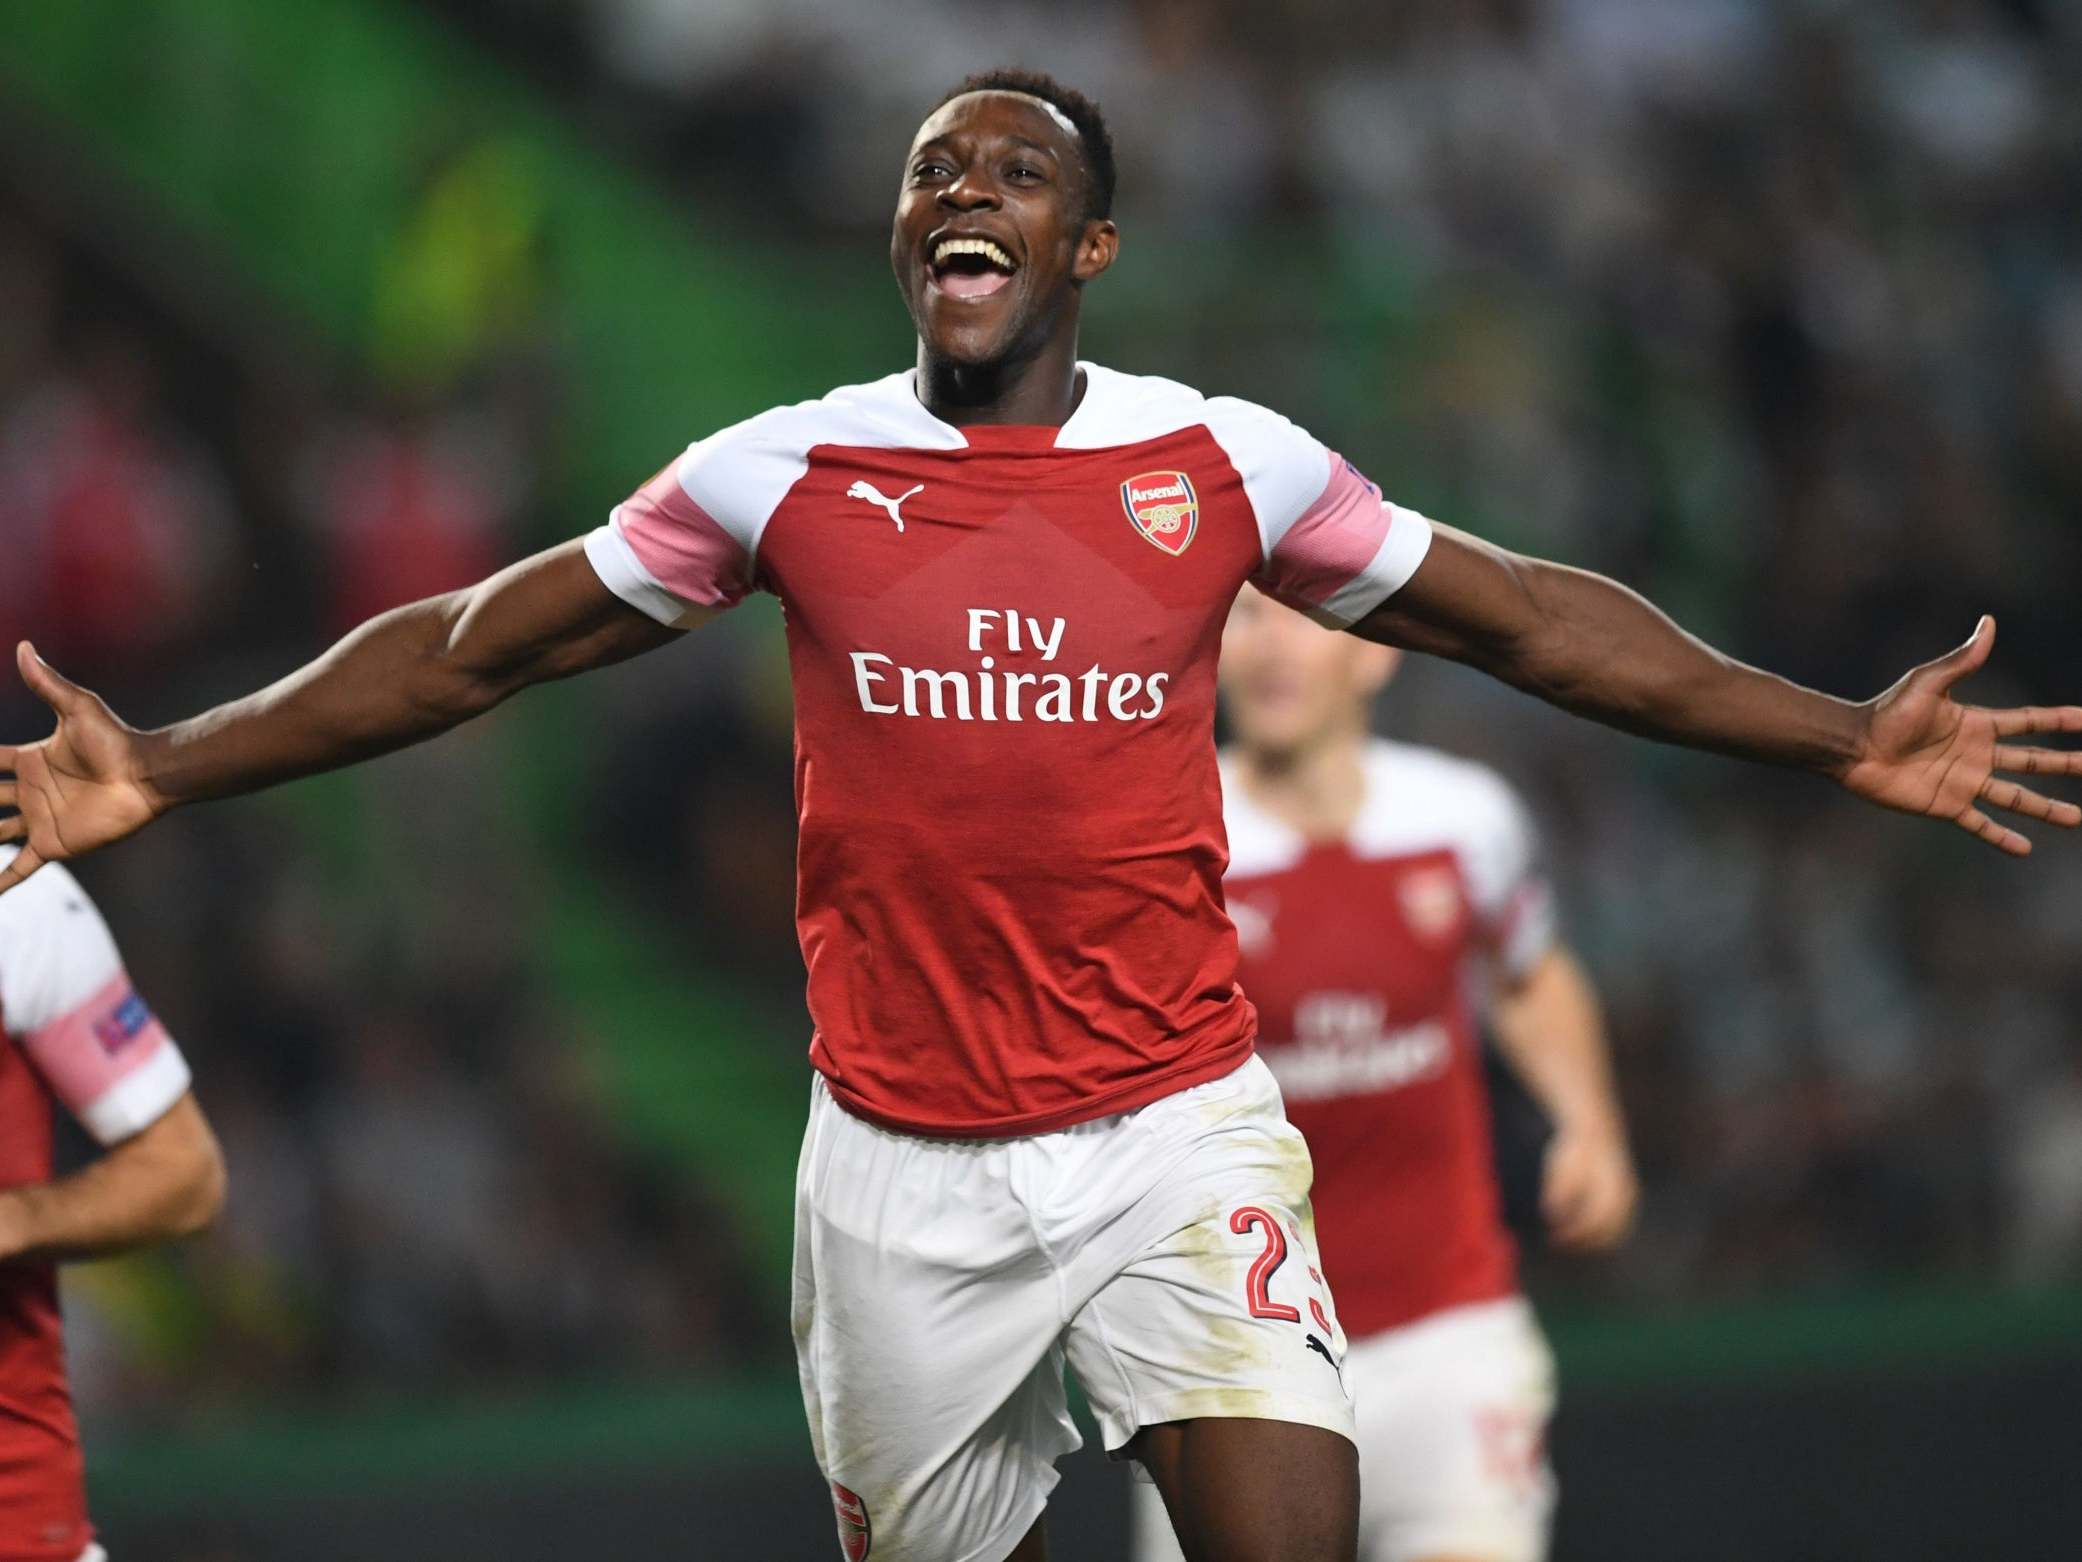 Danny Welbeck scored a goal every five Premier League games for Manchester United and for Arsenal (above); he doubled that rate on international duty